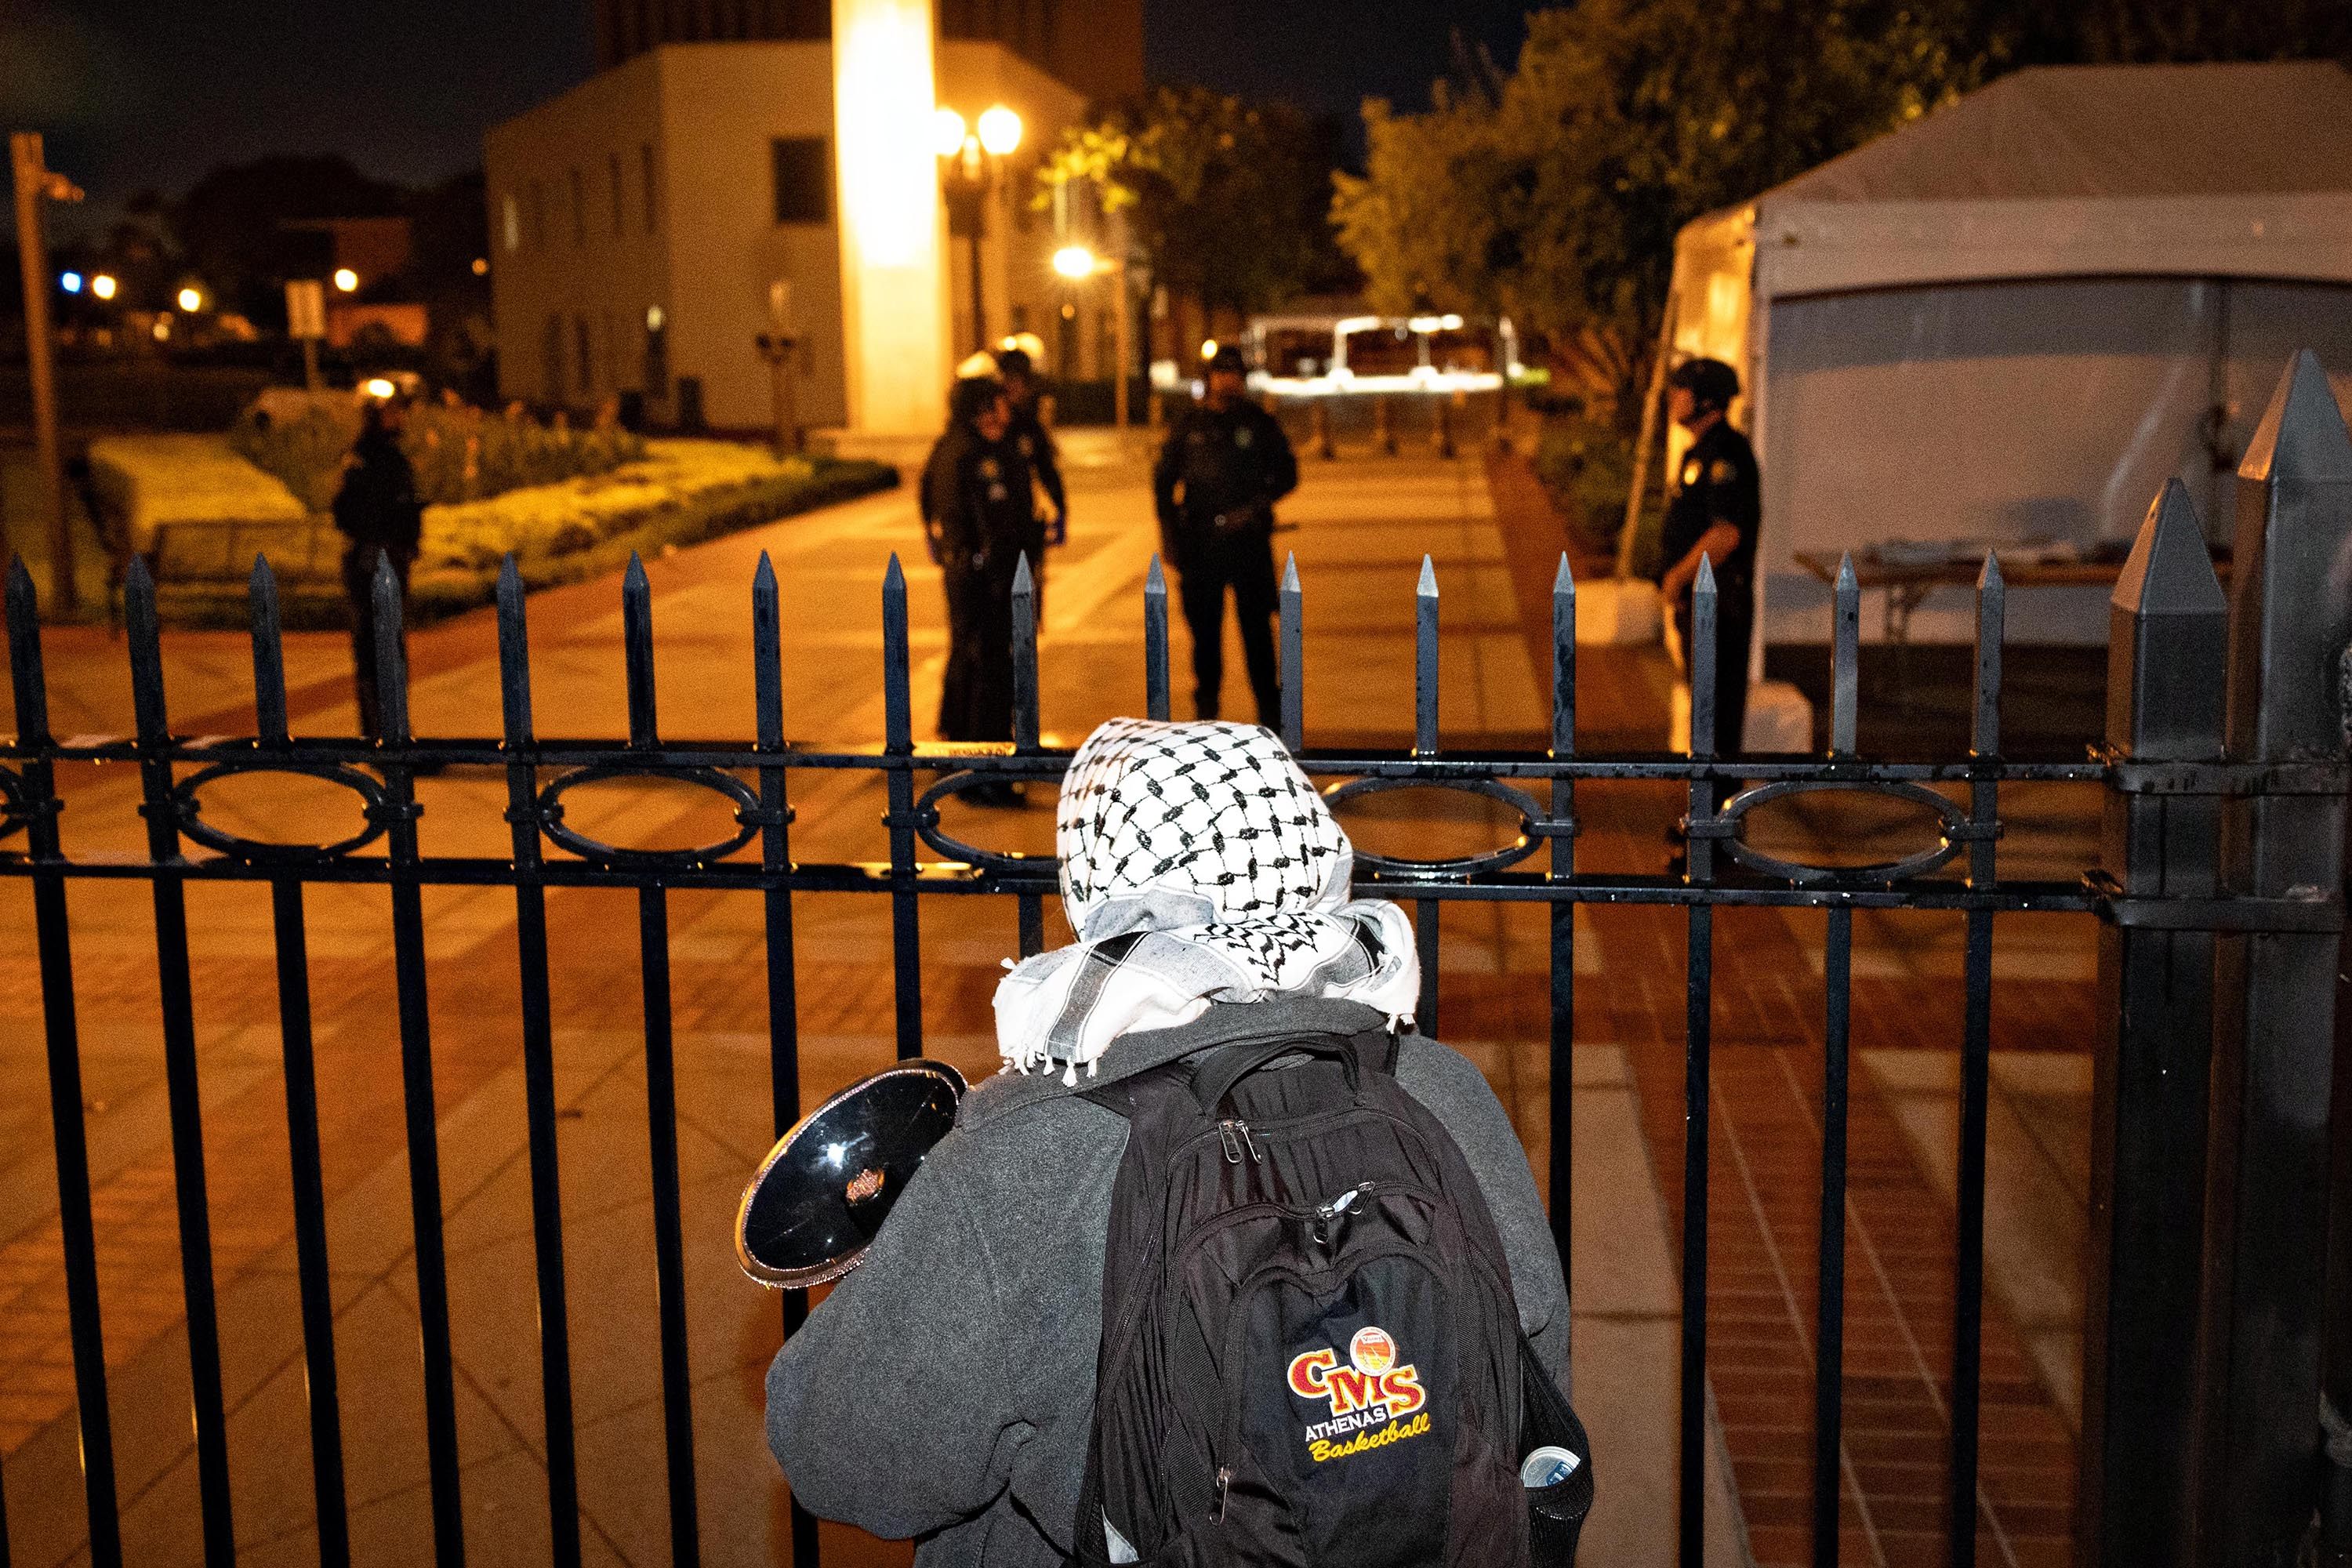 A pro-Palestinian supporter waits outside the gate of University of Southern California (USC) in Los Angeles after being kicked out of campus by police on Sunday. Photo: Los Angeles Times / TNS